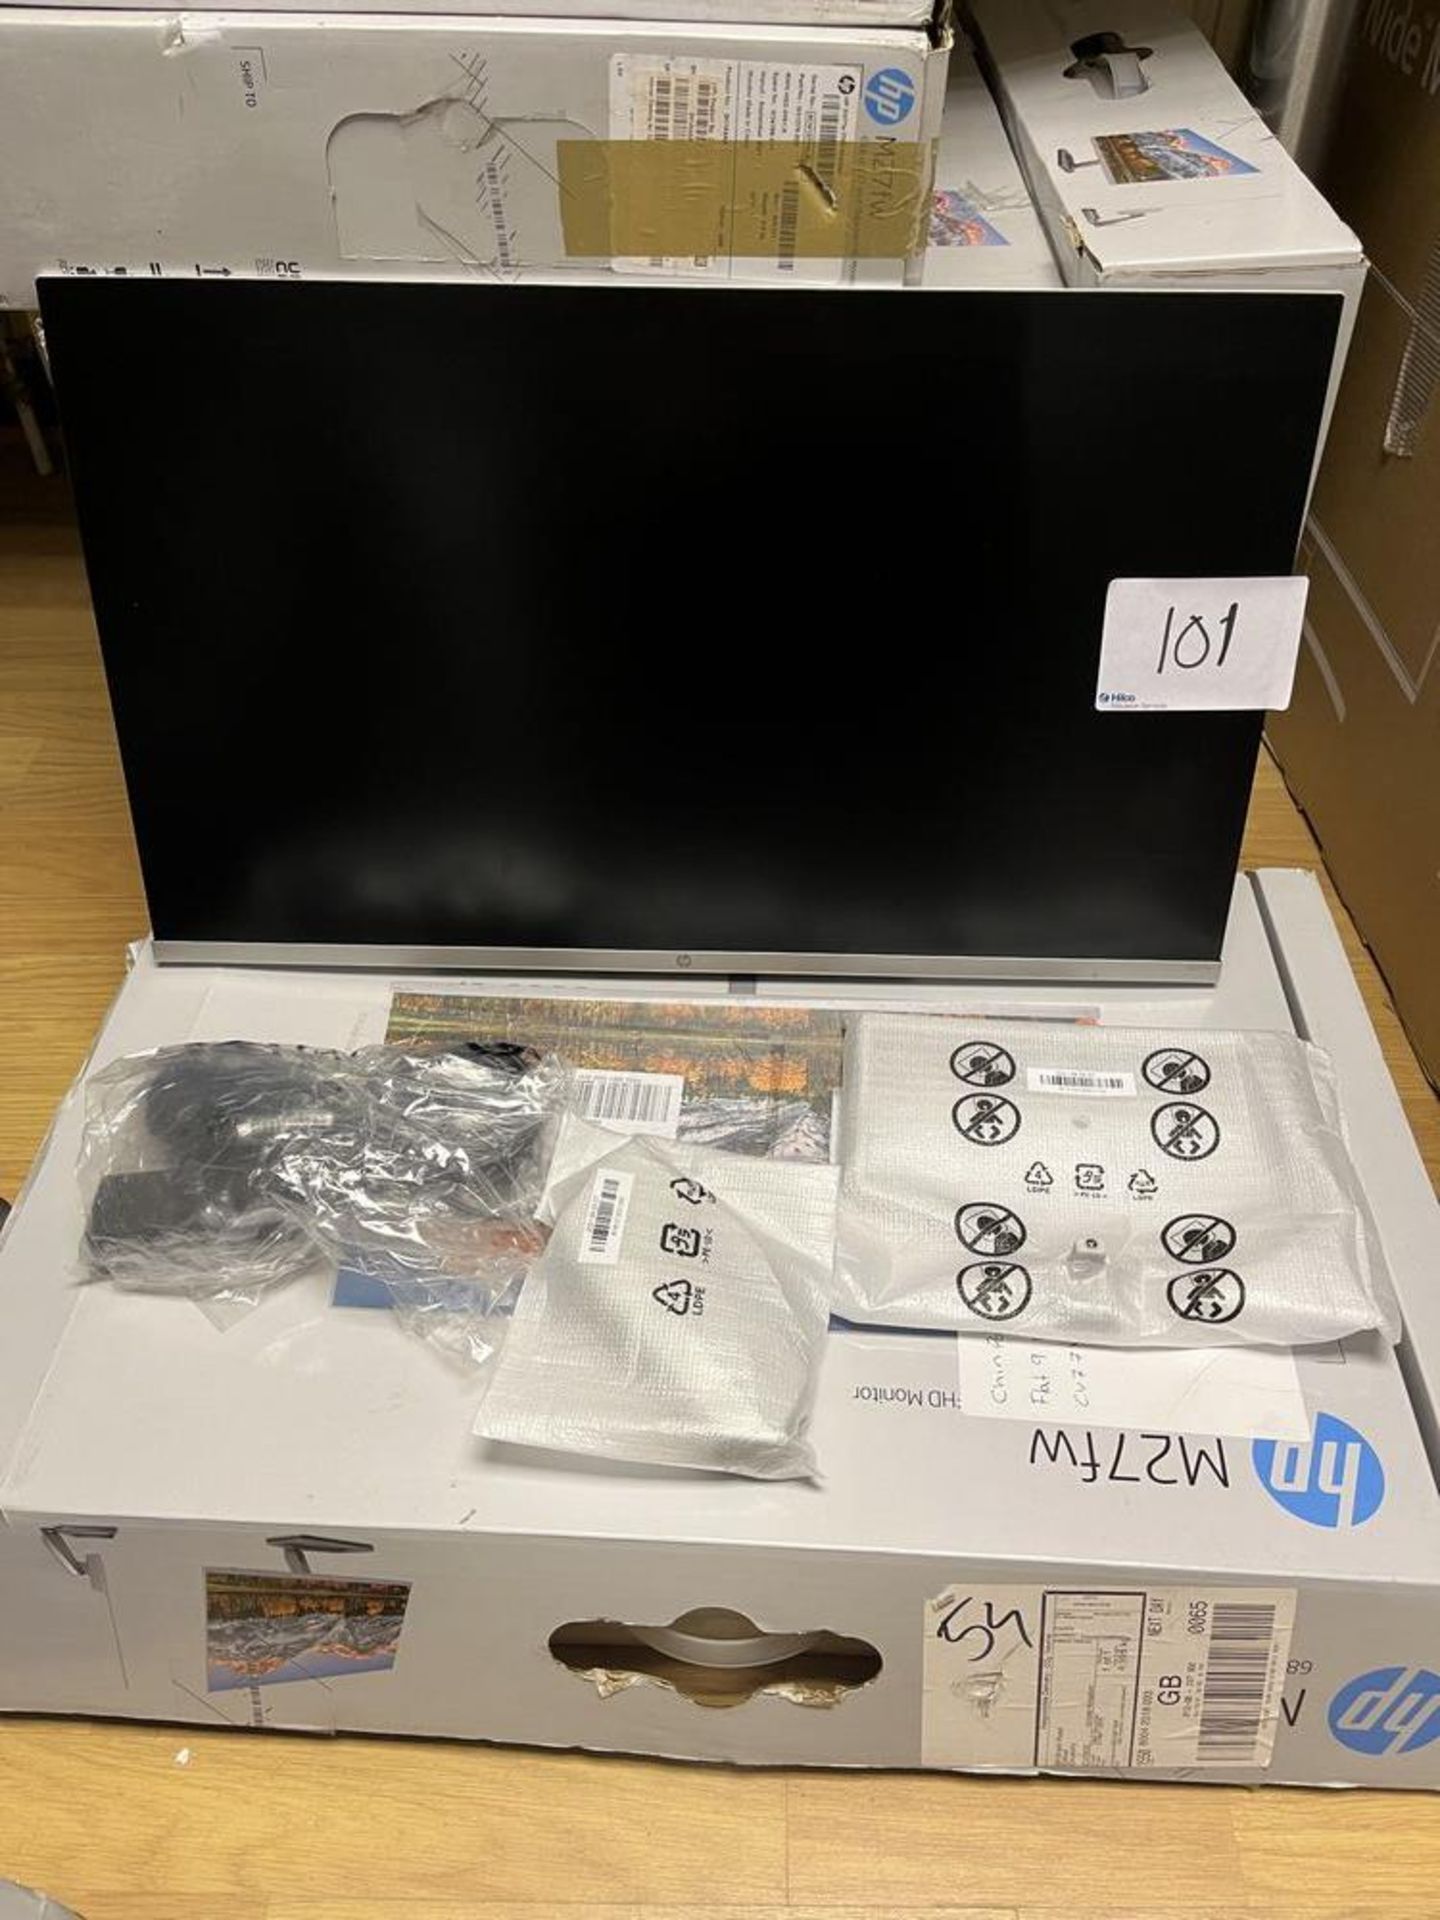 HP M27FW FHD Monitor 68.6cm, 27-inch diagonal With stand and cables, comes in box Serial Number 3C